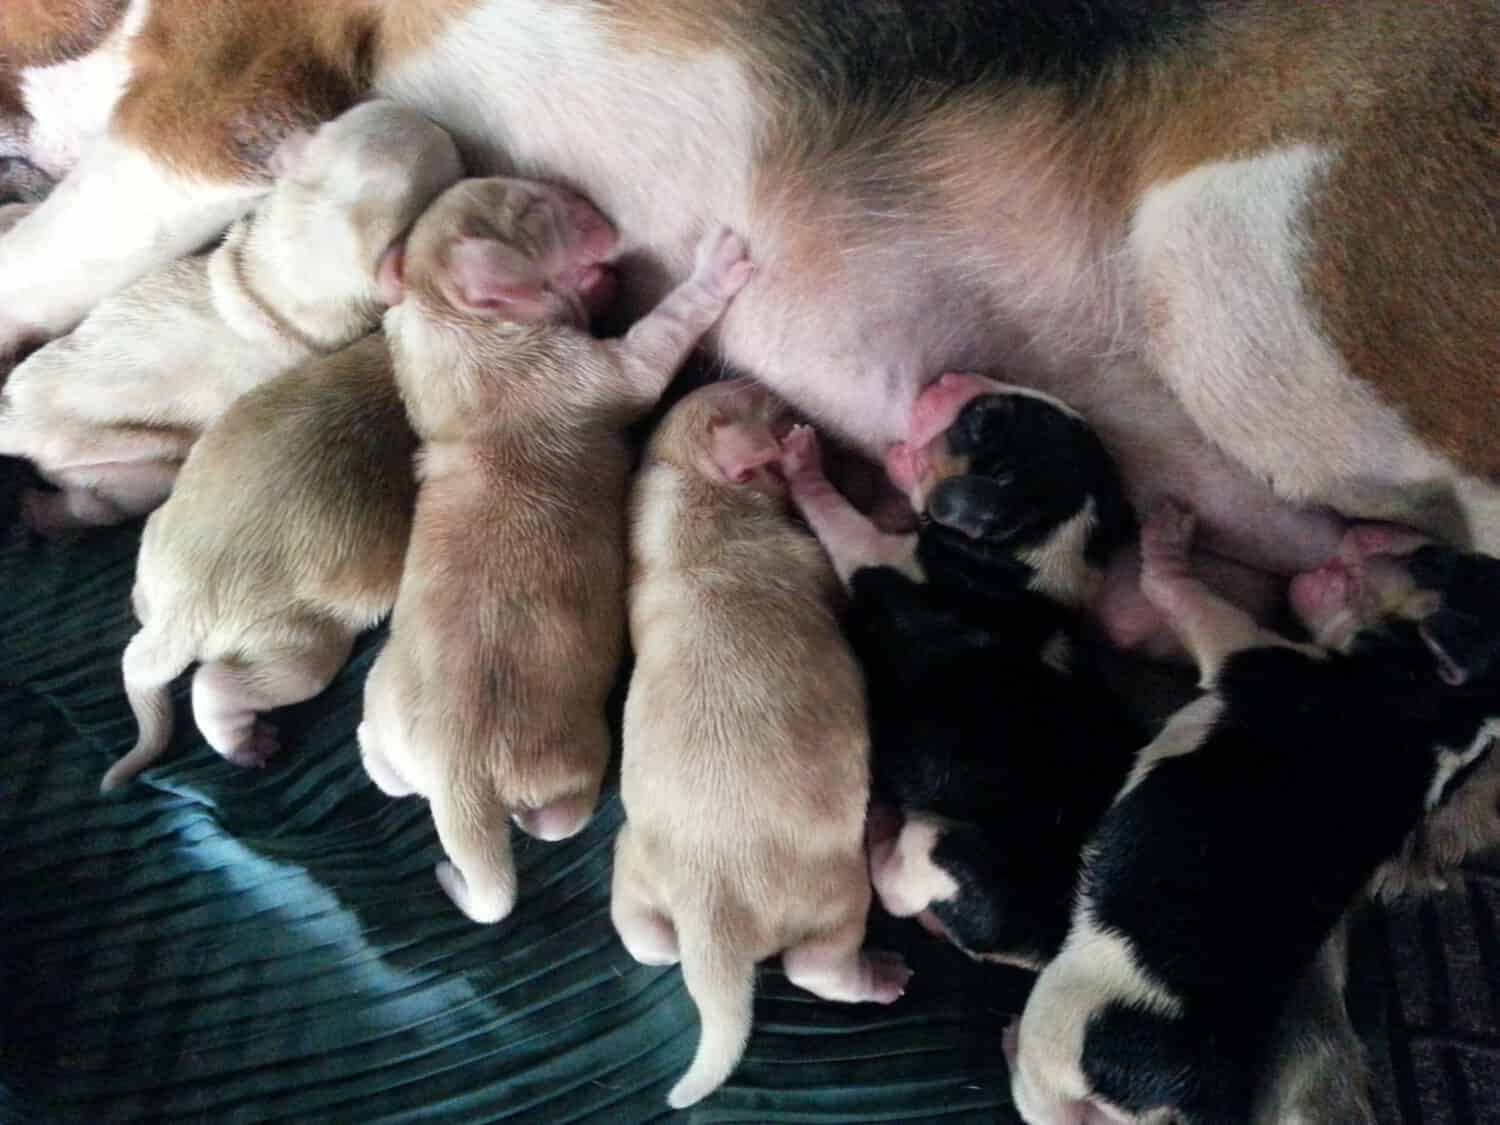 can a beagle have babies?